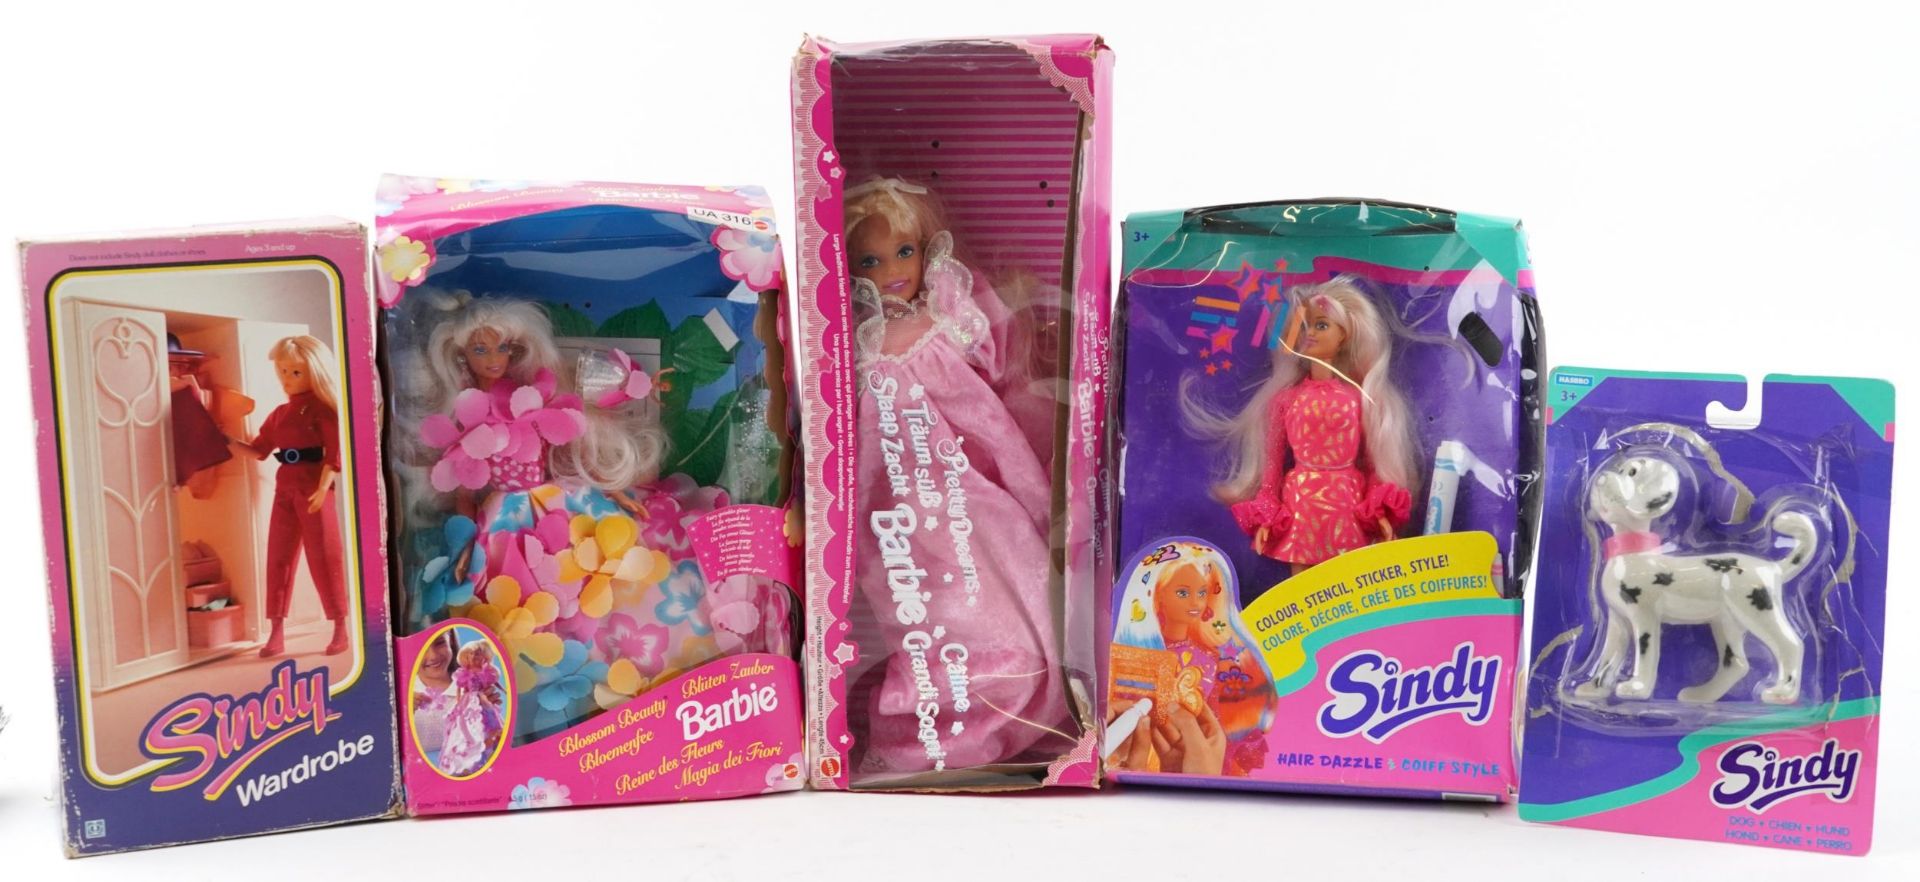 Vintage Barbie and Sindy toys with boxes by Mattel and Hasbro including Sindy Wardrobe, Blossom